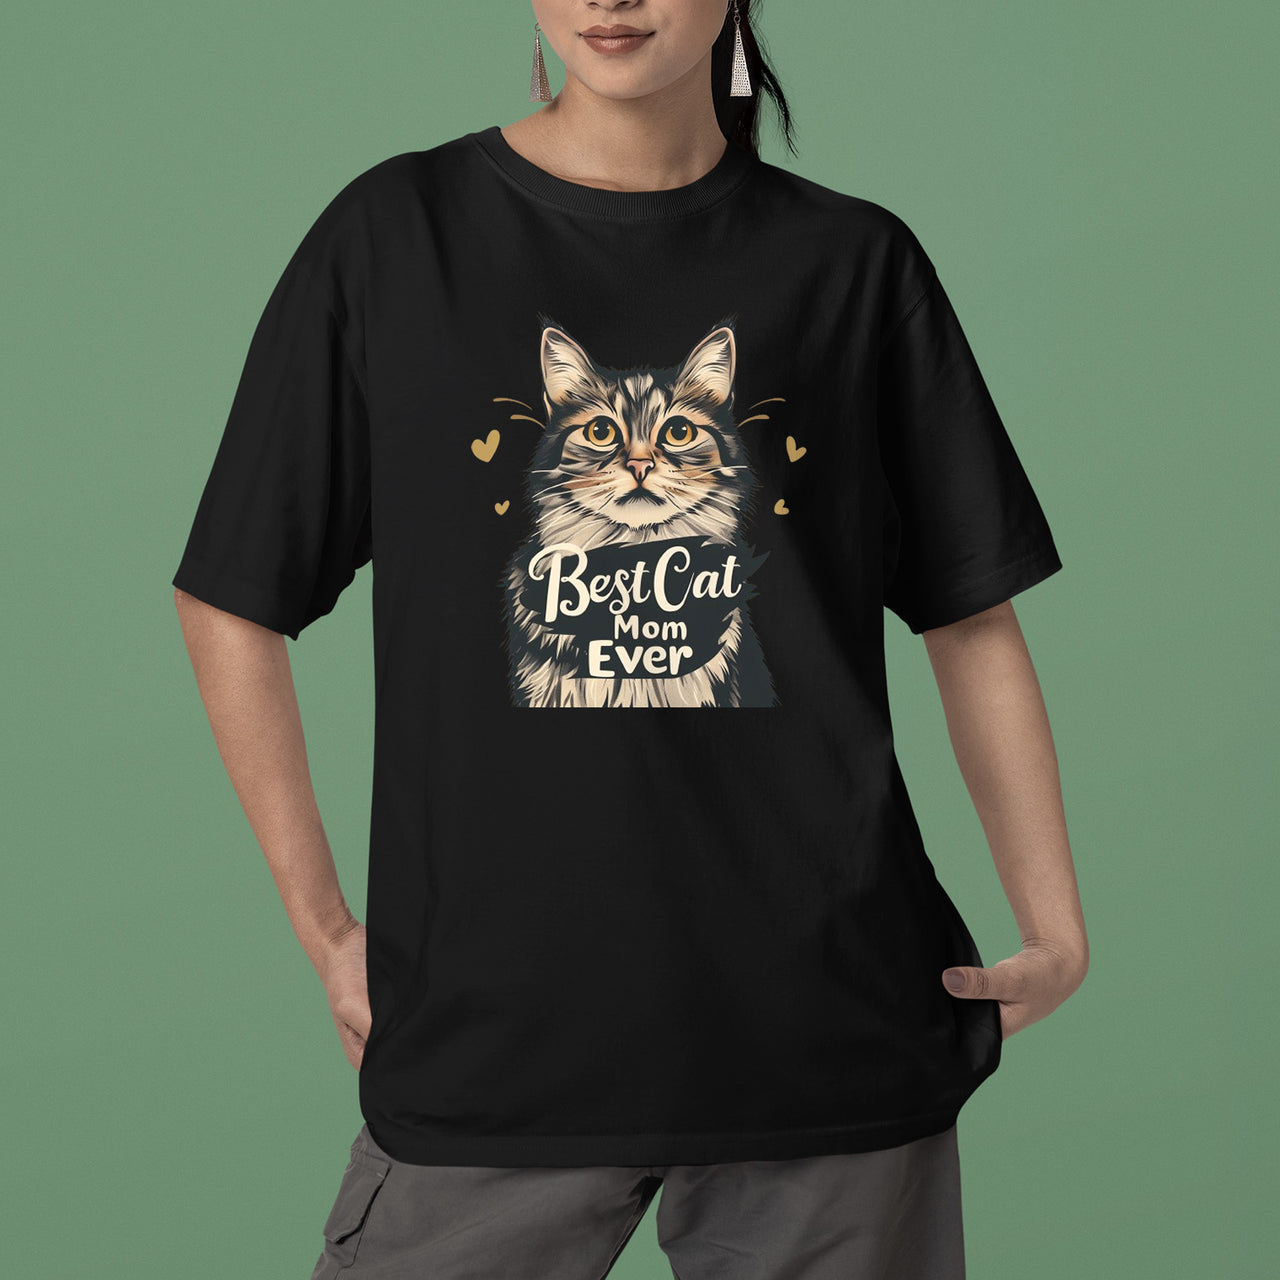 Best Cat Mom Ever Shirt, Best Cat Mom Shirt, Pet Lover Shirt, Cat Lover Shirt, Best Cat Mom Ever, Cat Owner Shirt, Gift For Cat Mom, Funny Cat Shirts, Women Cat T-Shirt, Mother's Day Gift, Cat Lover Wife Gifts, Cat Shirt 02